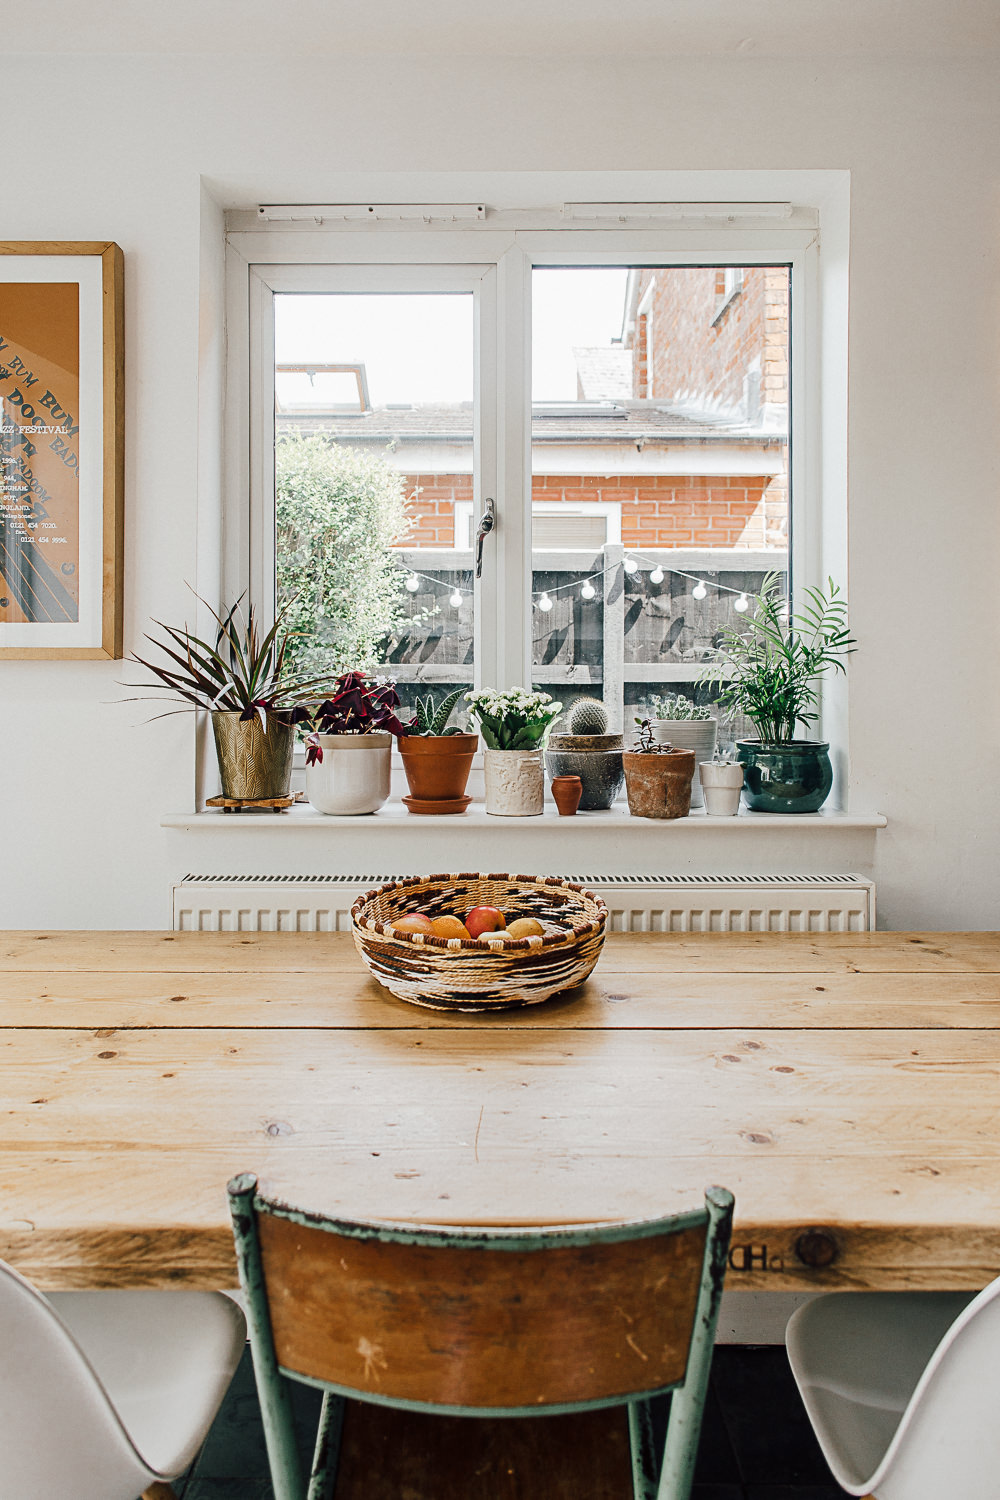 Wooden kitchen table top and planters on window sill